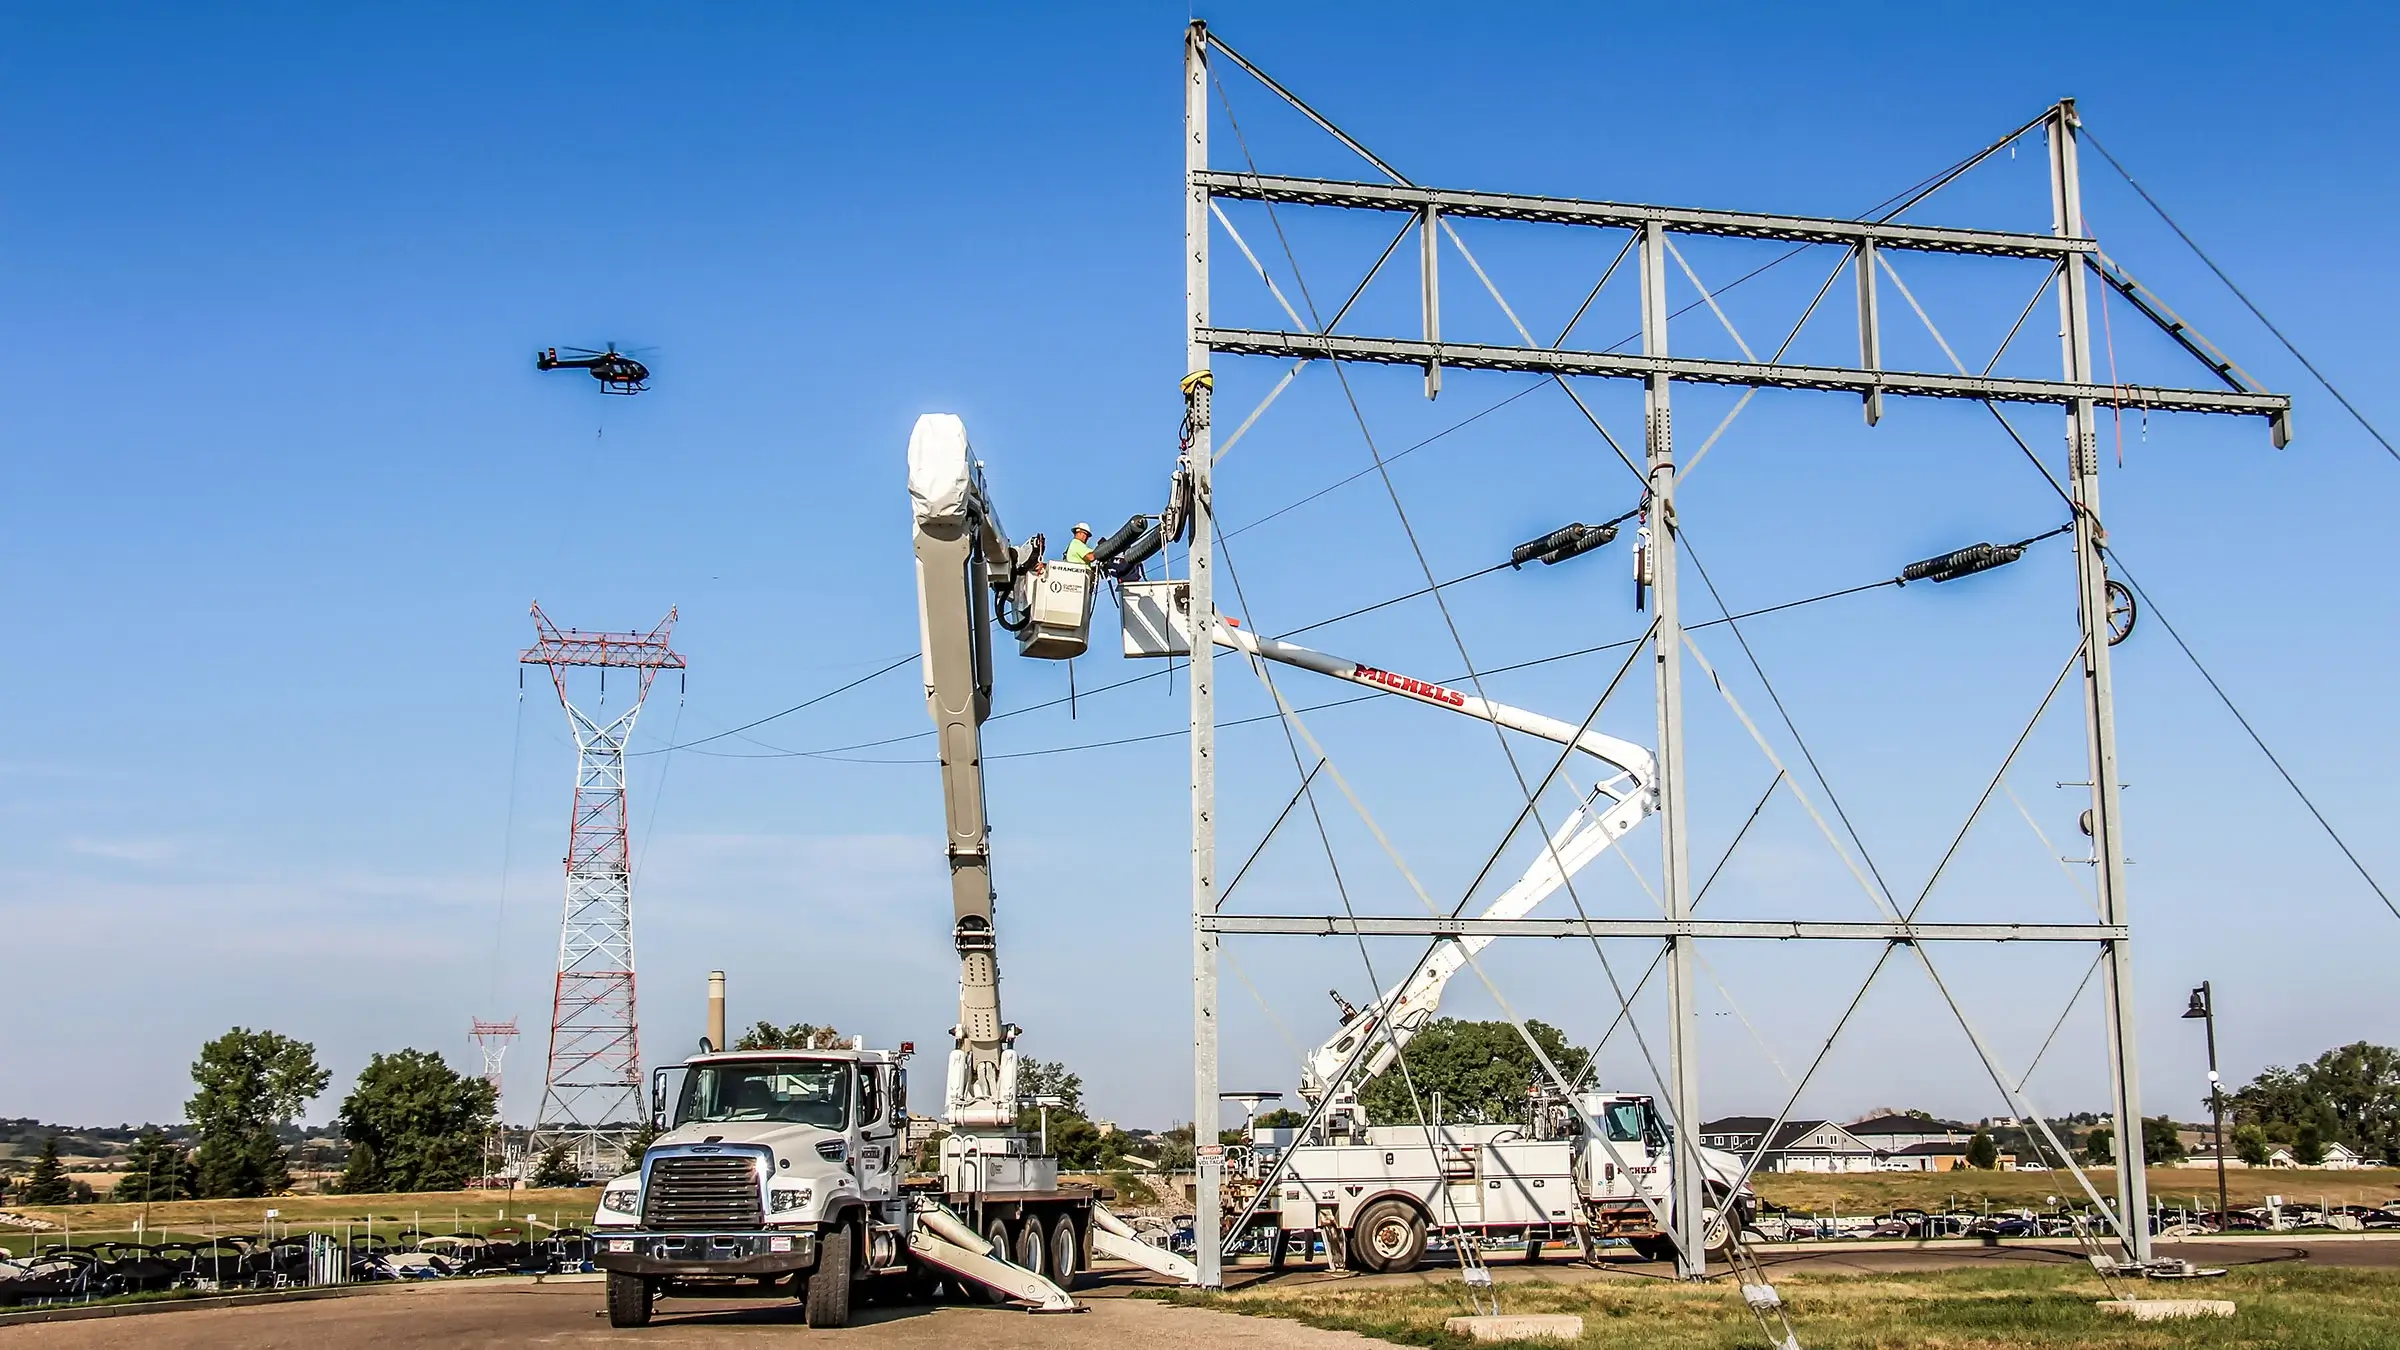 Two Michels Power bucket trucks operate with a helicopter nearby on large electrical structures.